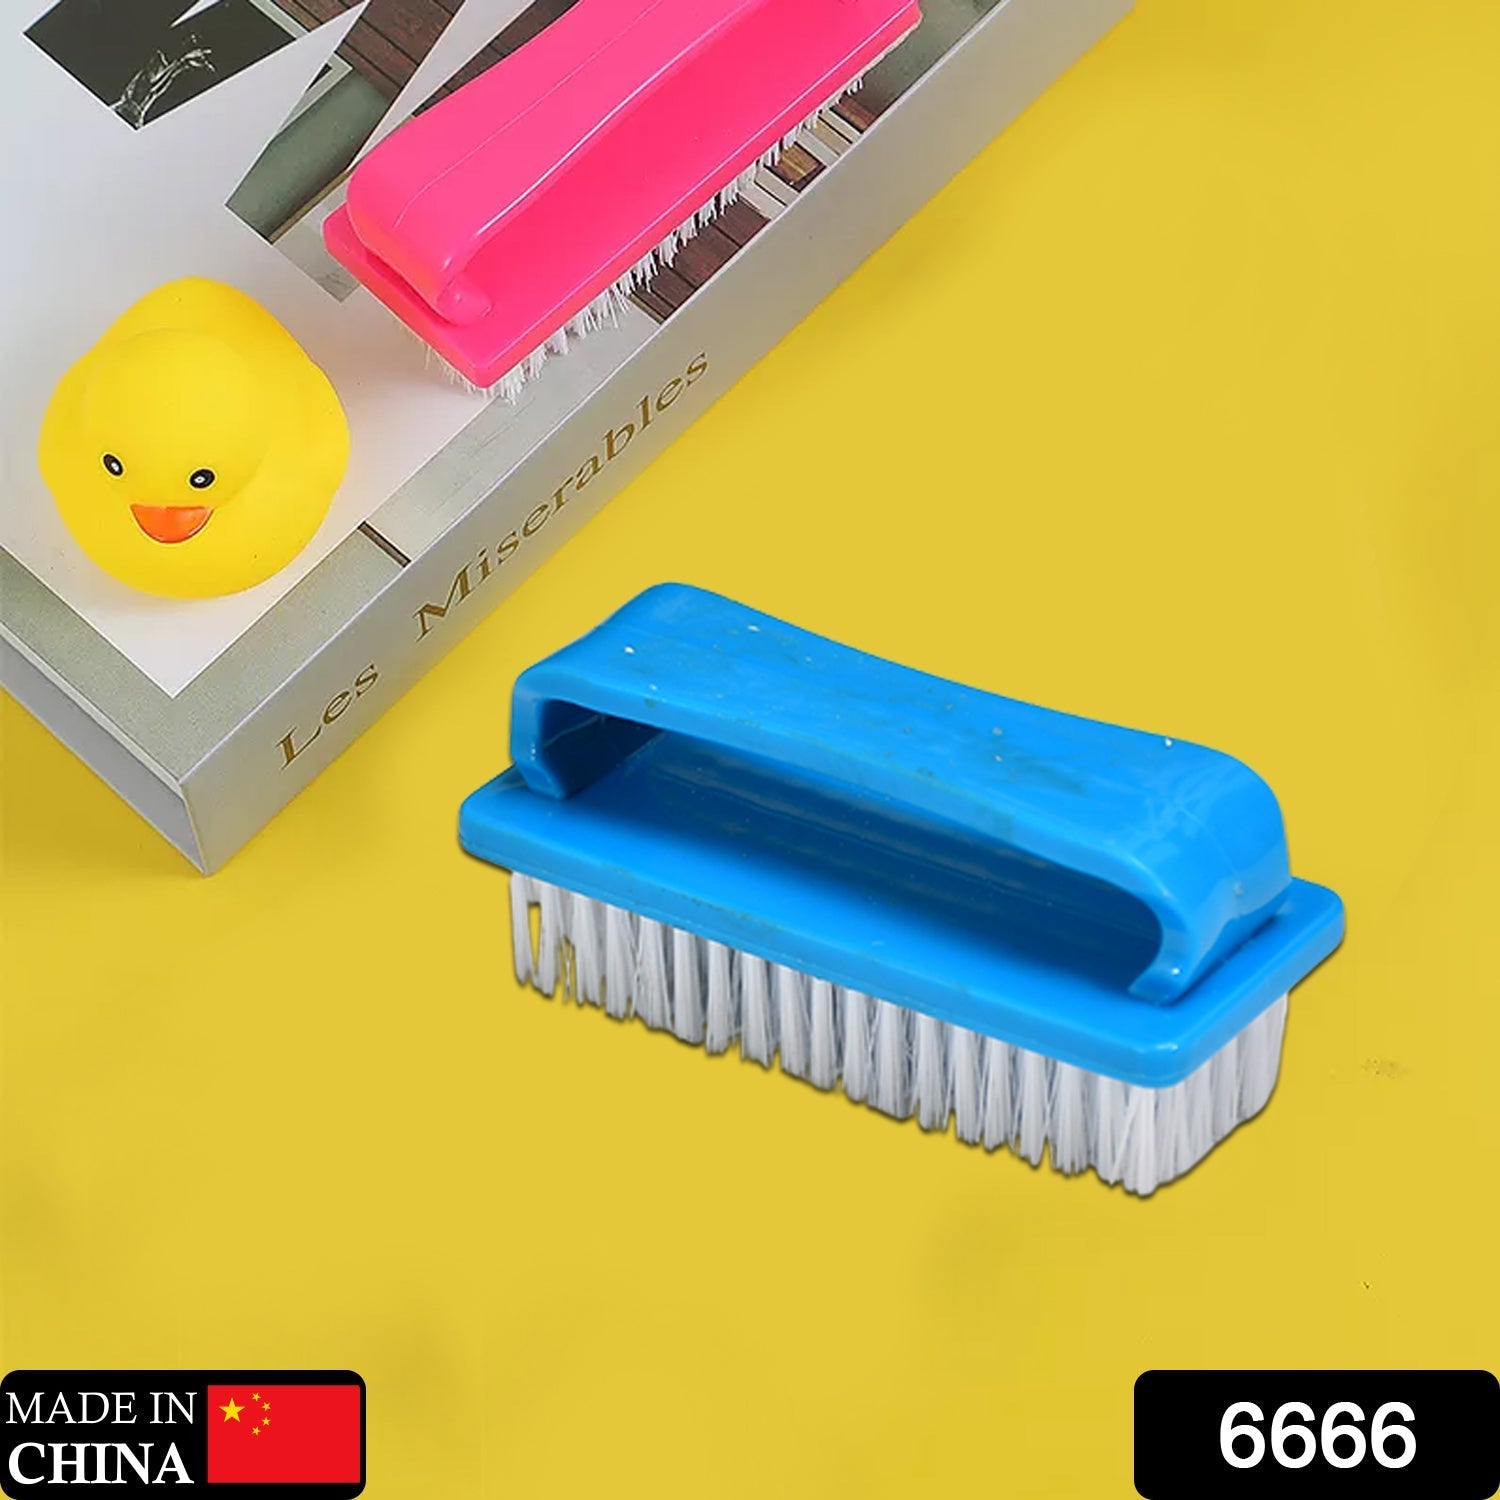 6666 Multi-Functional Laundry Brush for Cleaning Clothes, Shoes, Car Wheels, Floor with Handle. DeoDap